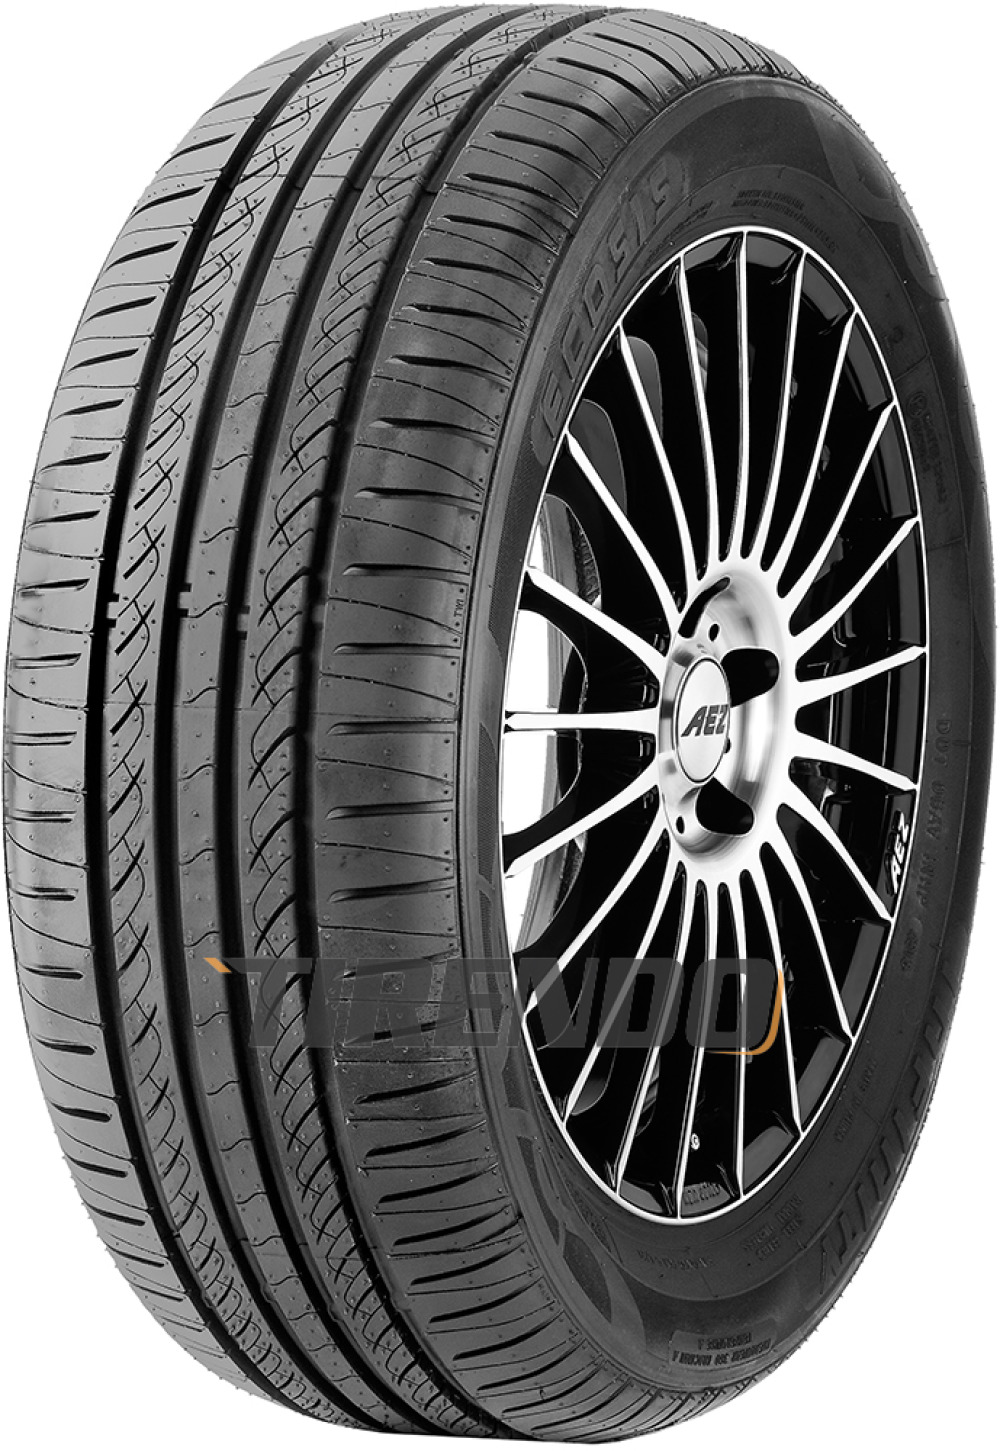 INFINITY ECOSIS 185/70 R 14 88T